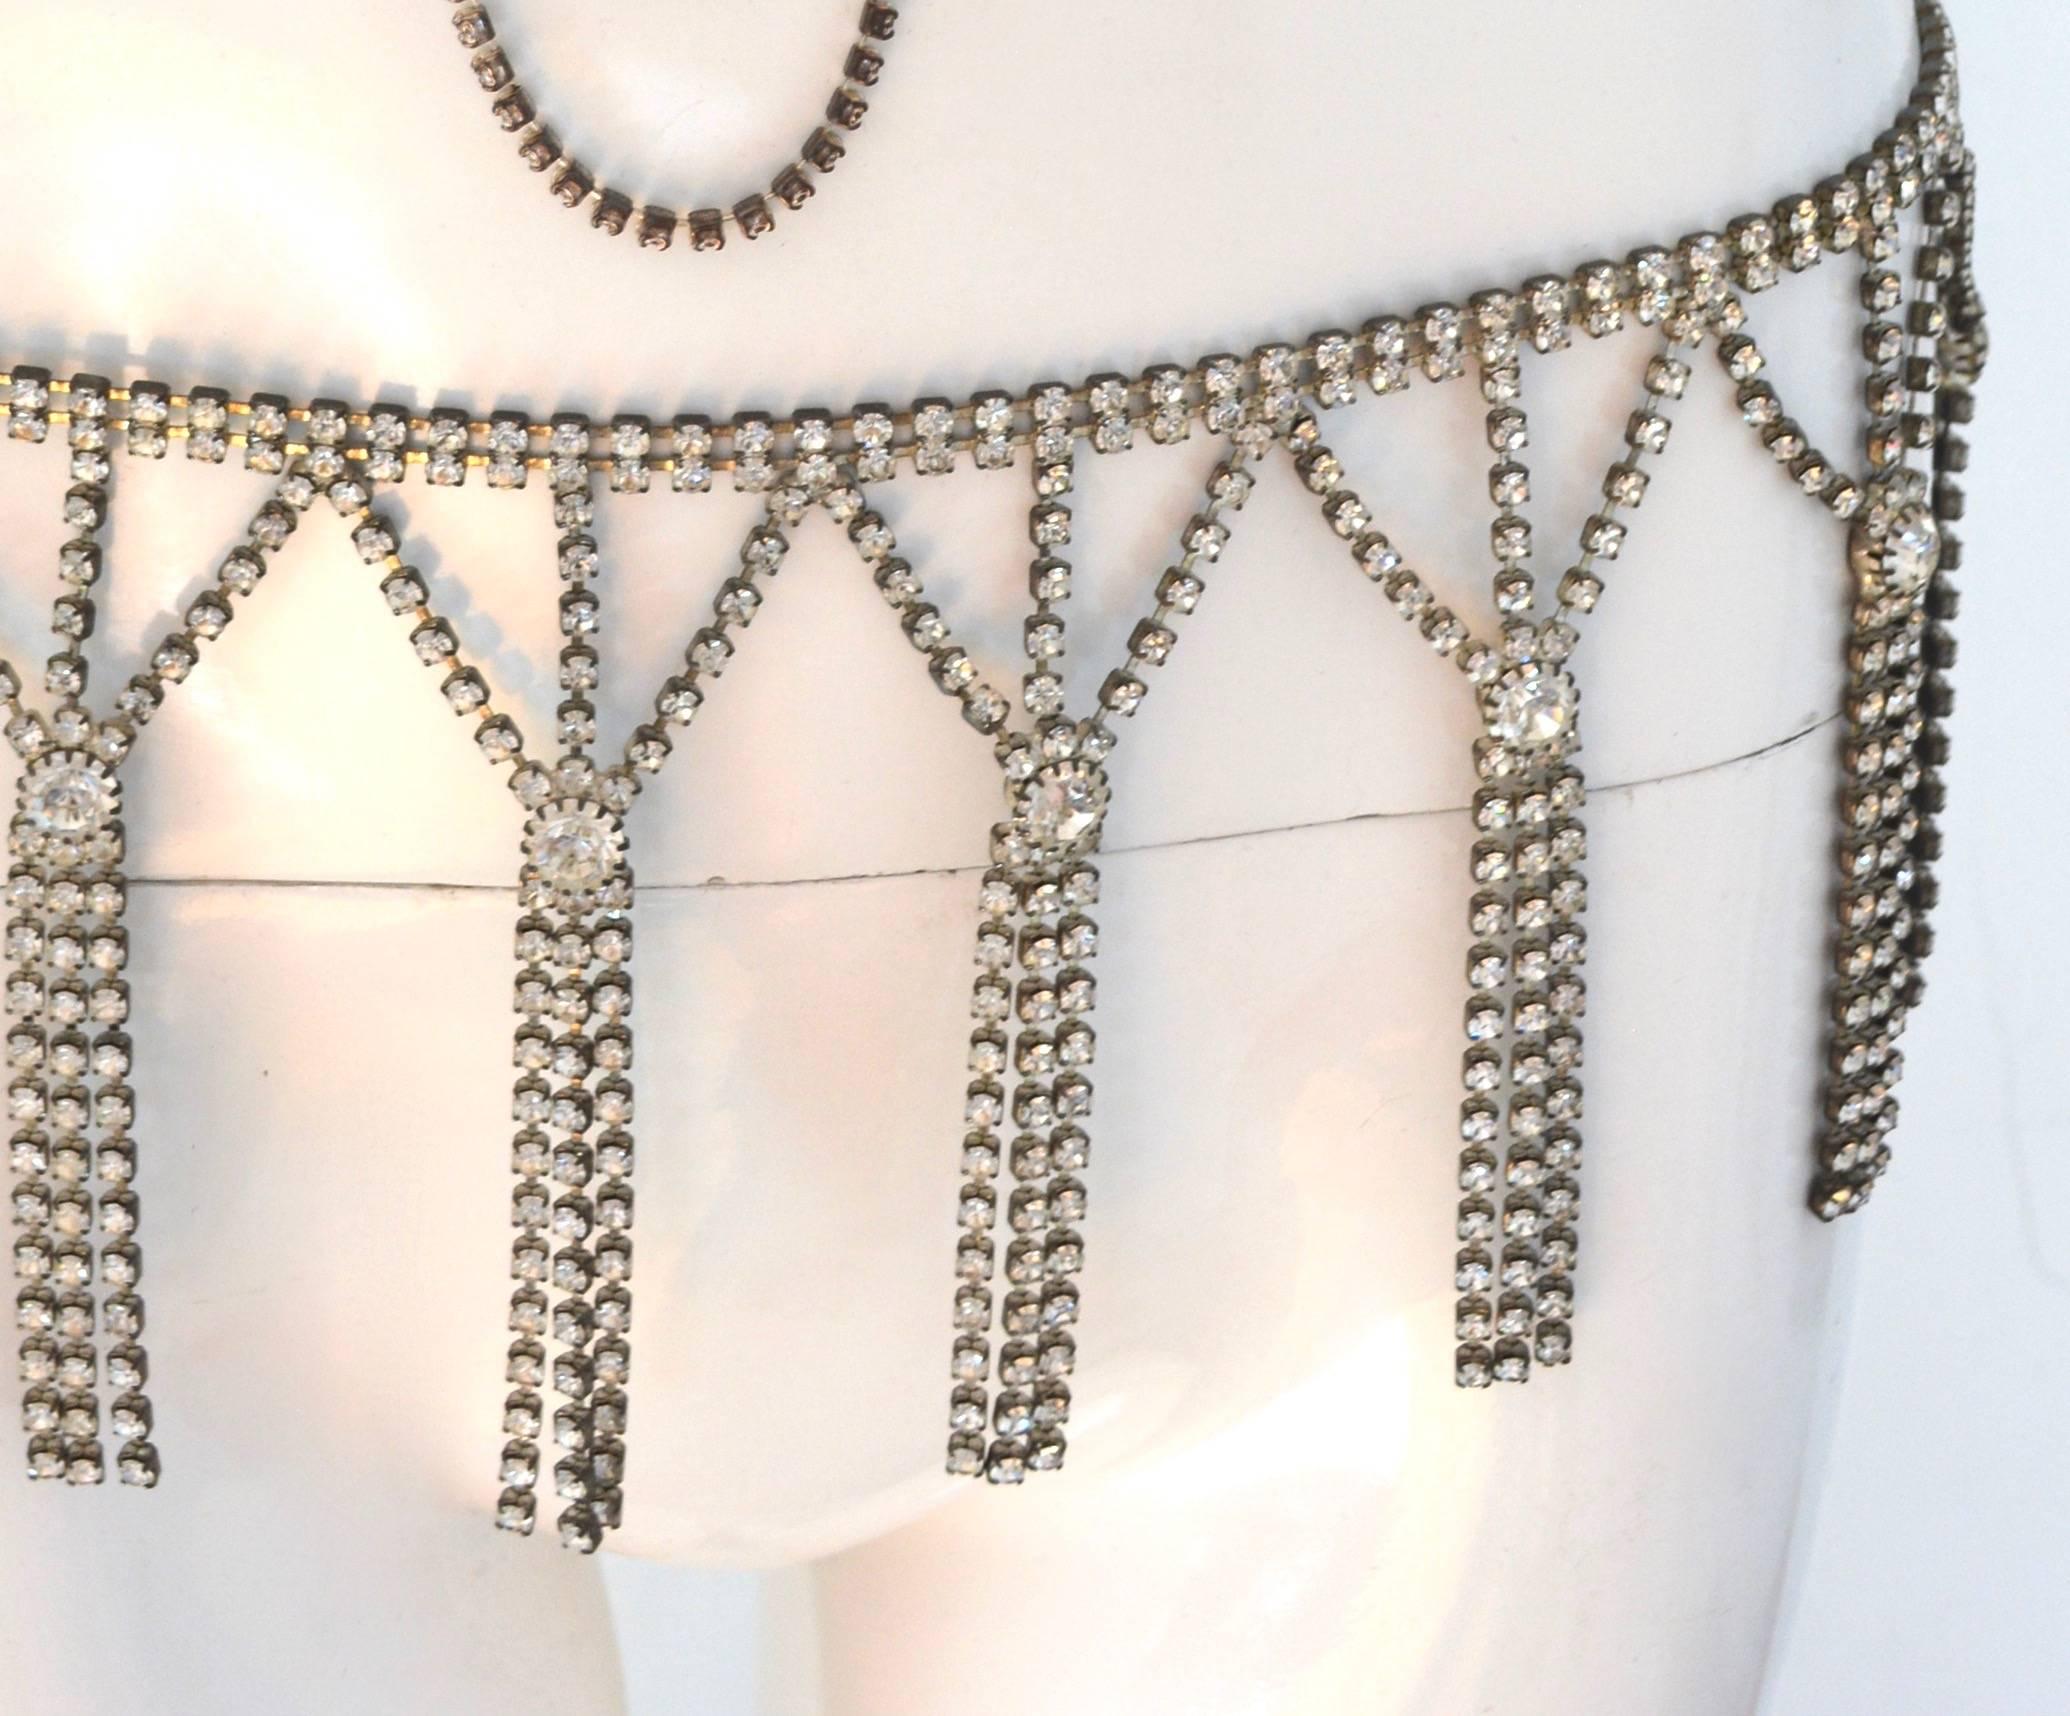 1960s-70s Showgirl Rhinestone Necklace and Belt 5